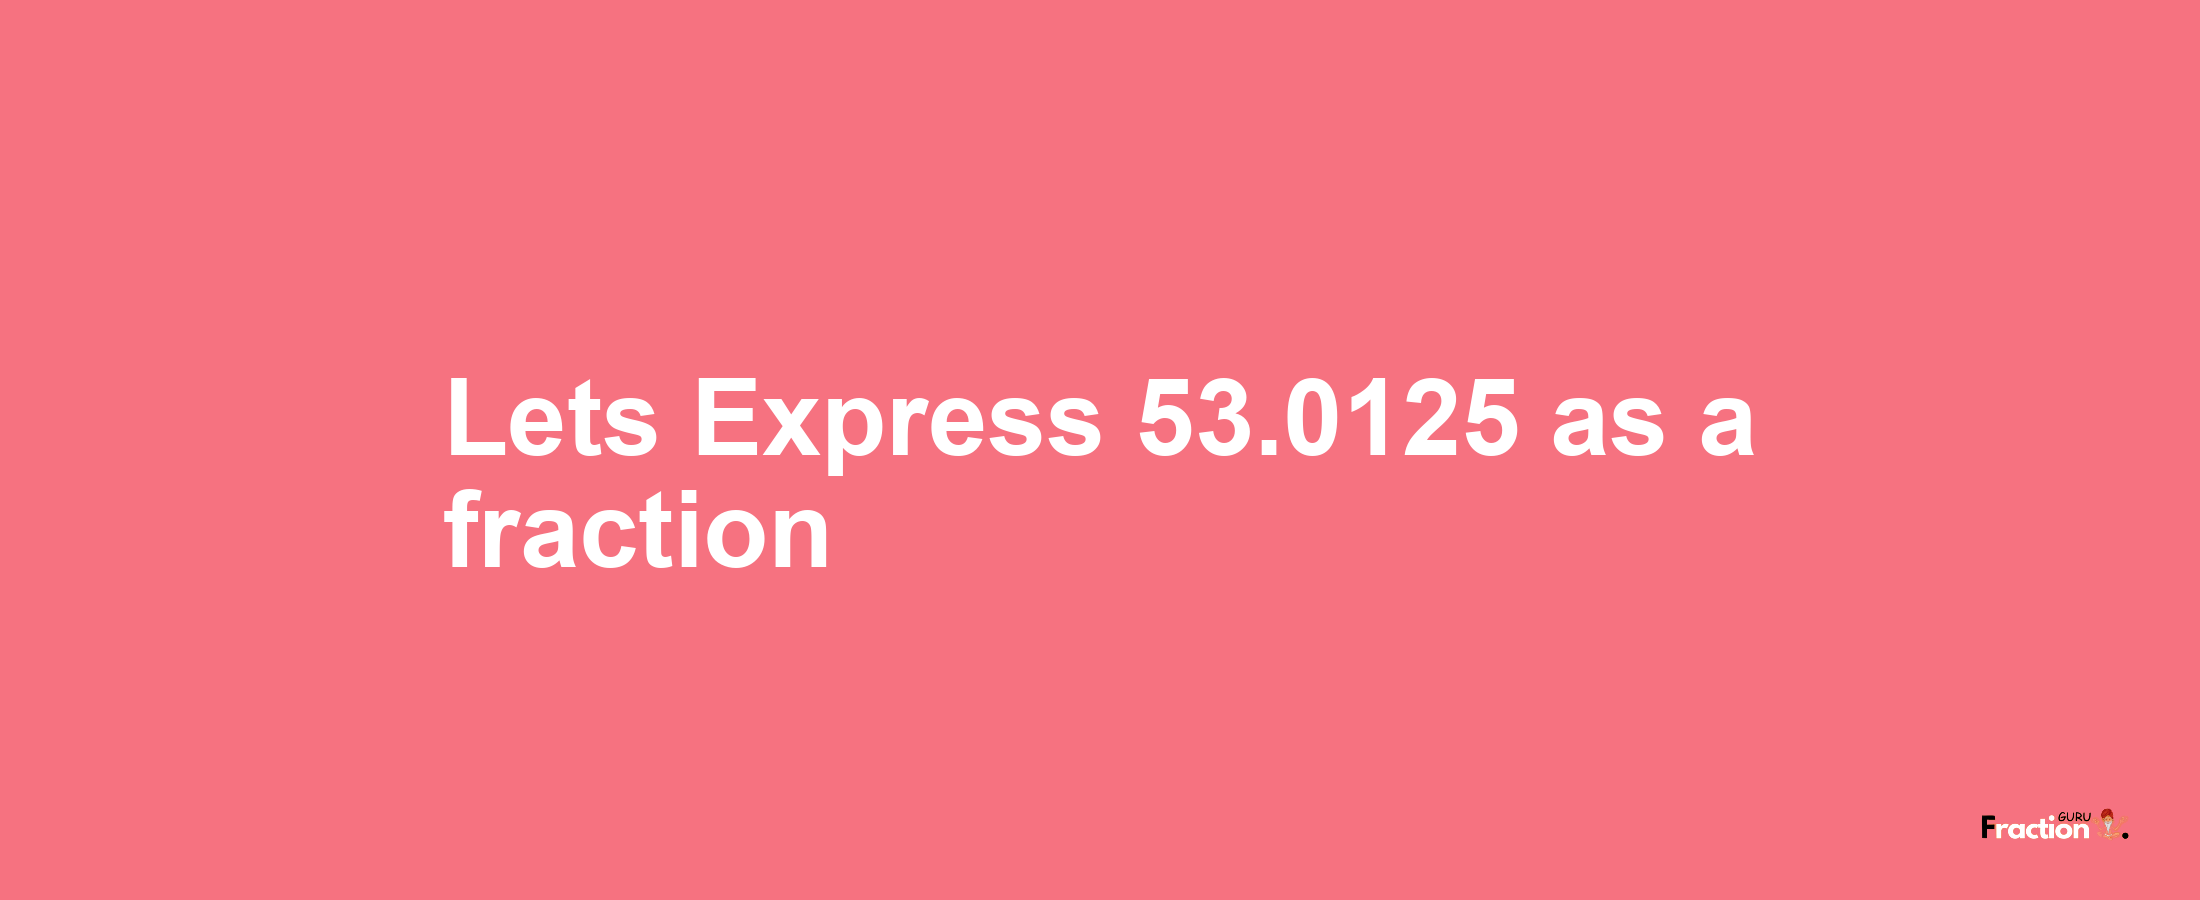 Lets Express 53.0125 as afraction